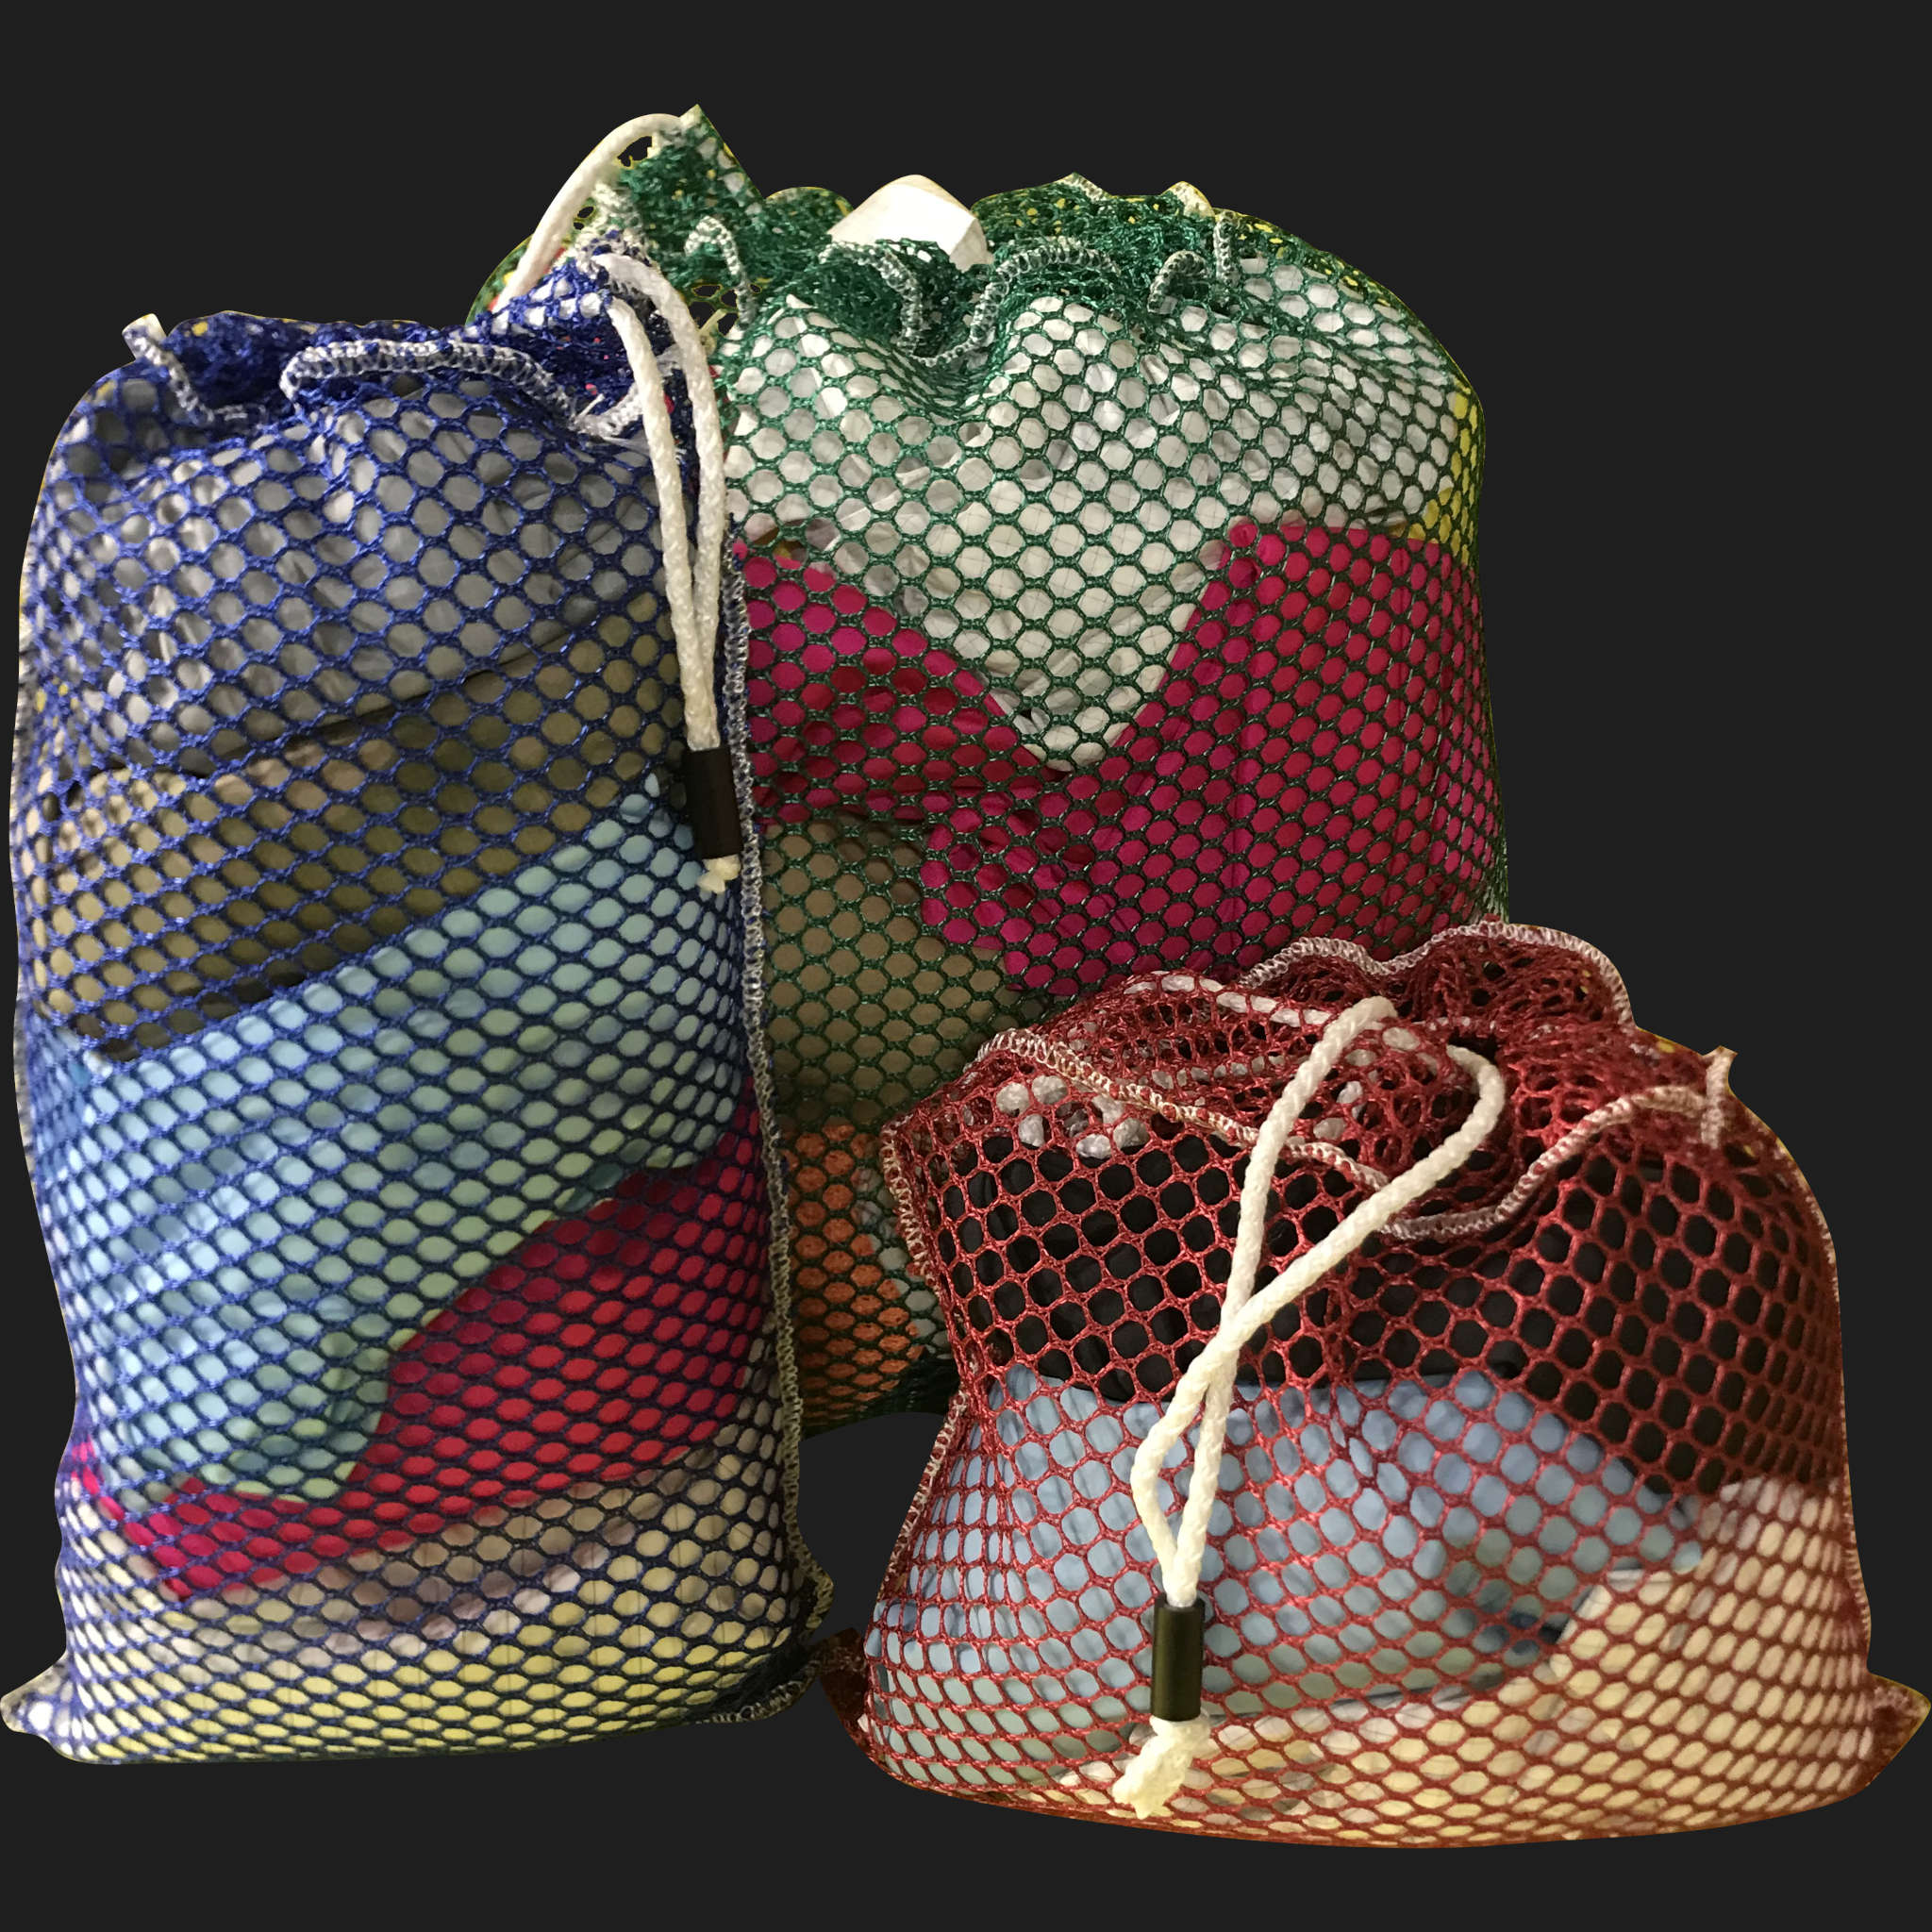 56" x 72" Customized Mesh-Net-Laundry Bags Heavy Duty with Cord and barrellock closure